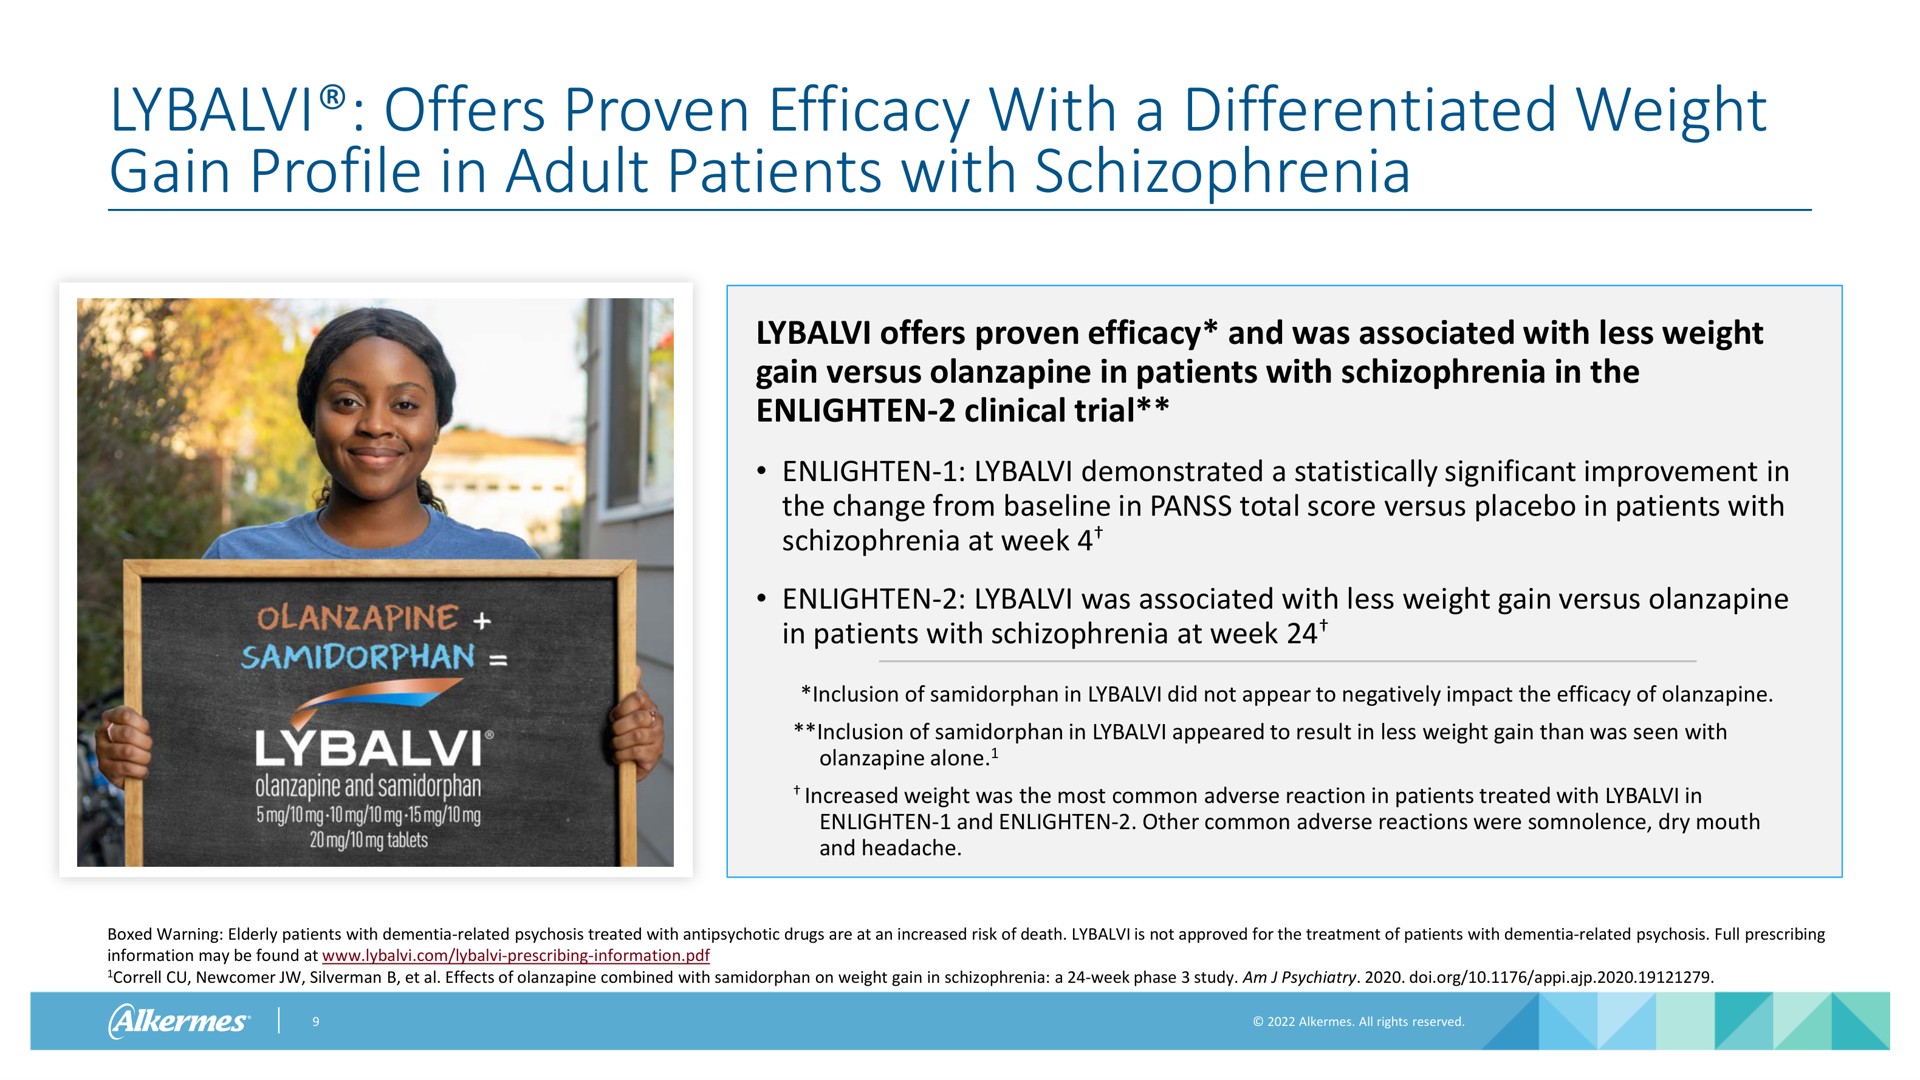 offers proven efficacy with a differentiated weight gain profile in adult patients with schizophrenia | Alkermes